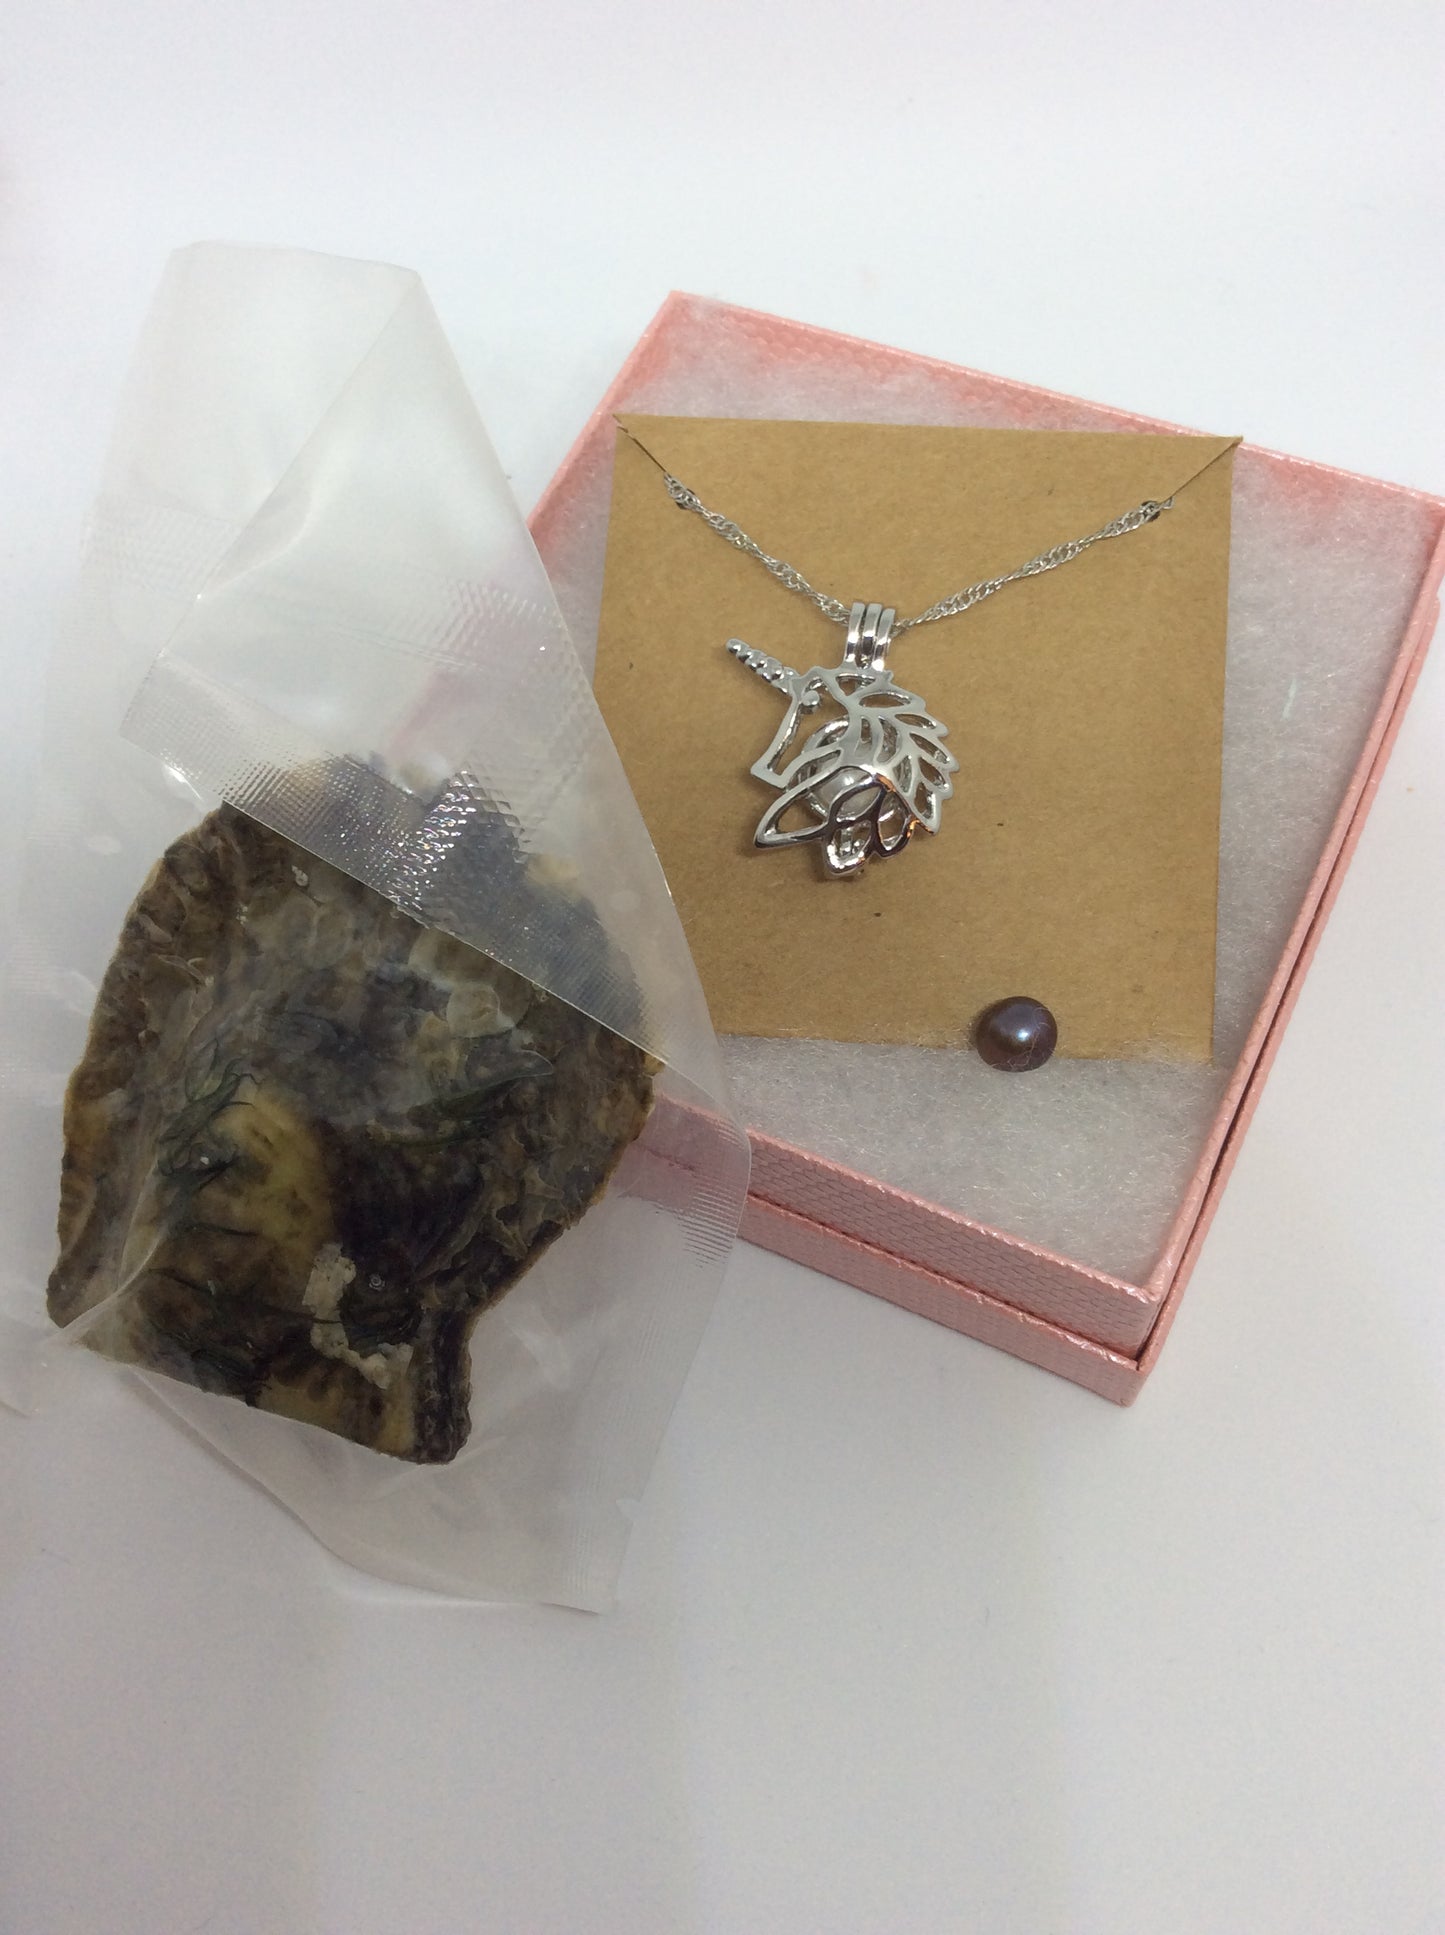 Package Deal: Oyster, Necklace Pendant w/ chain (Coming Soon!!)